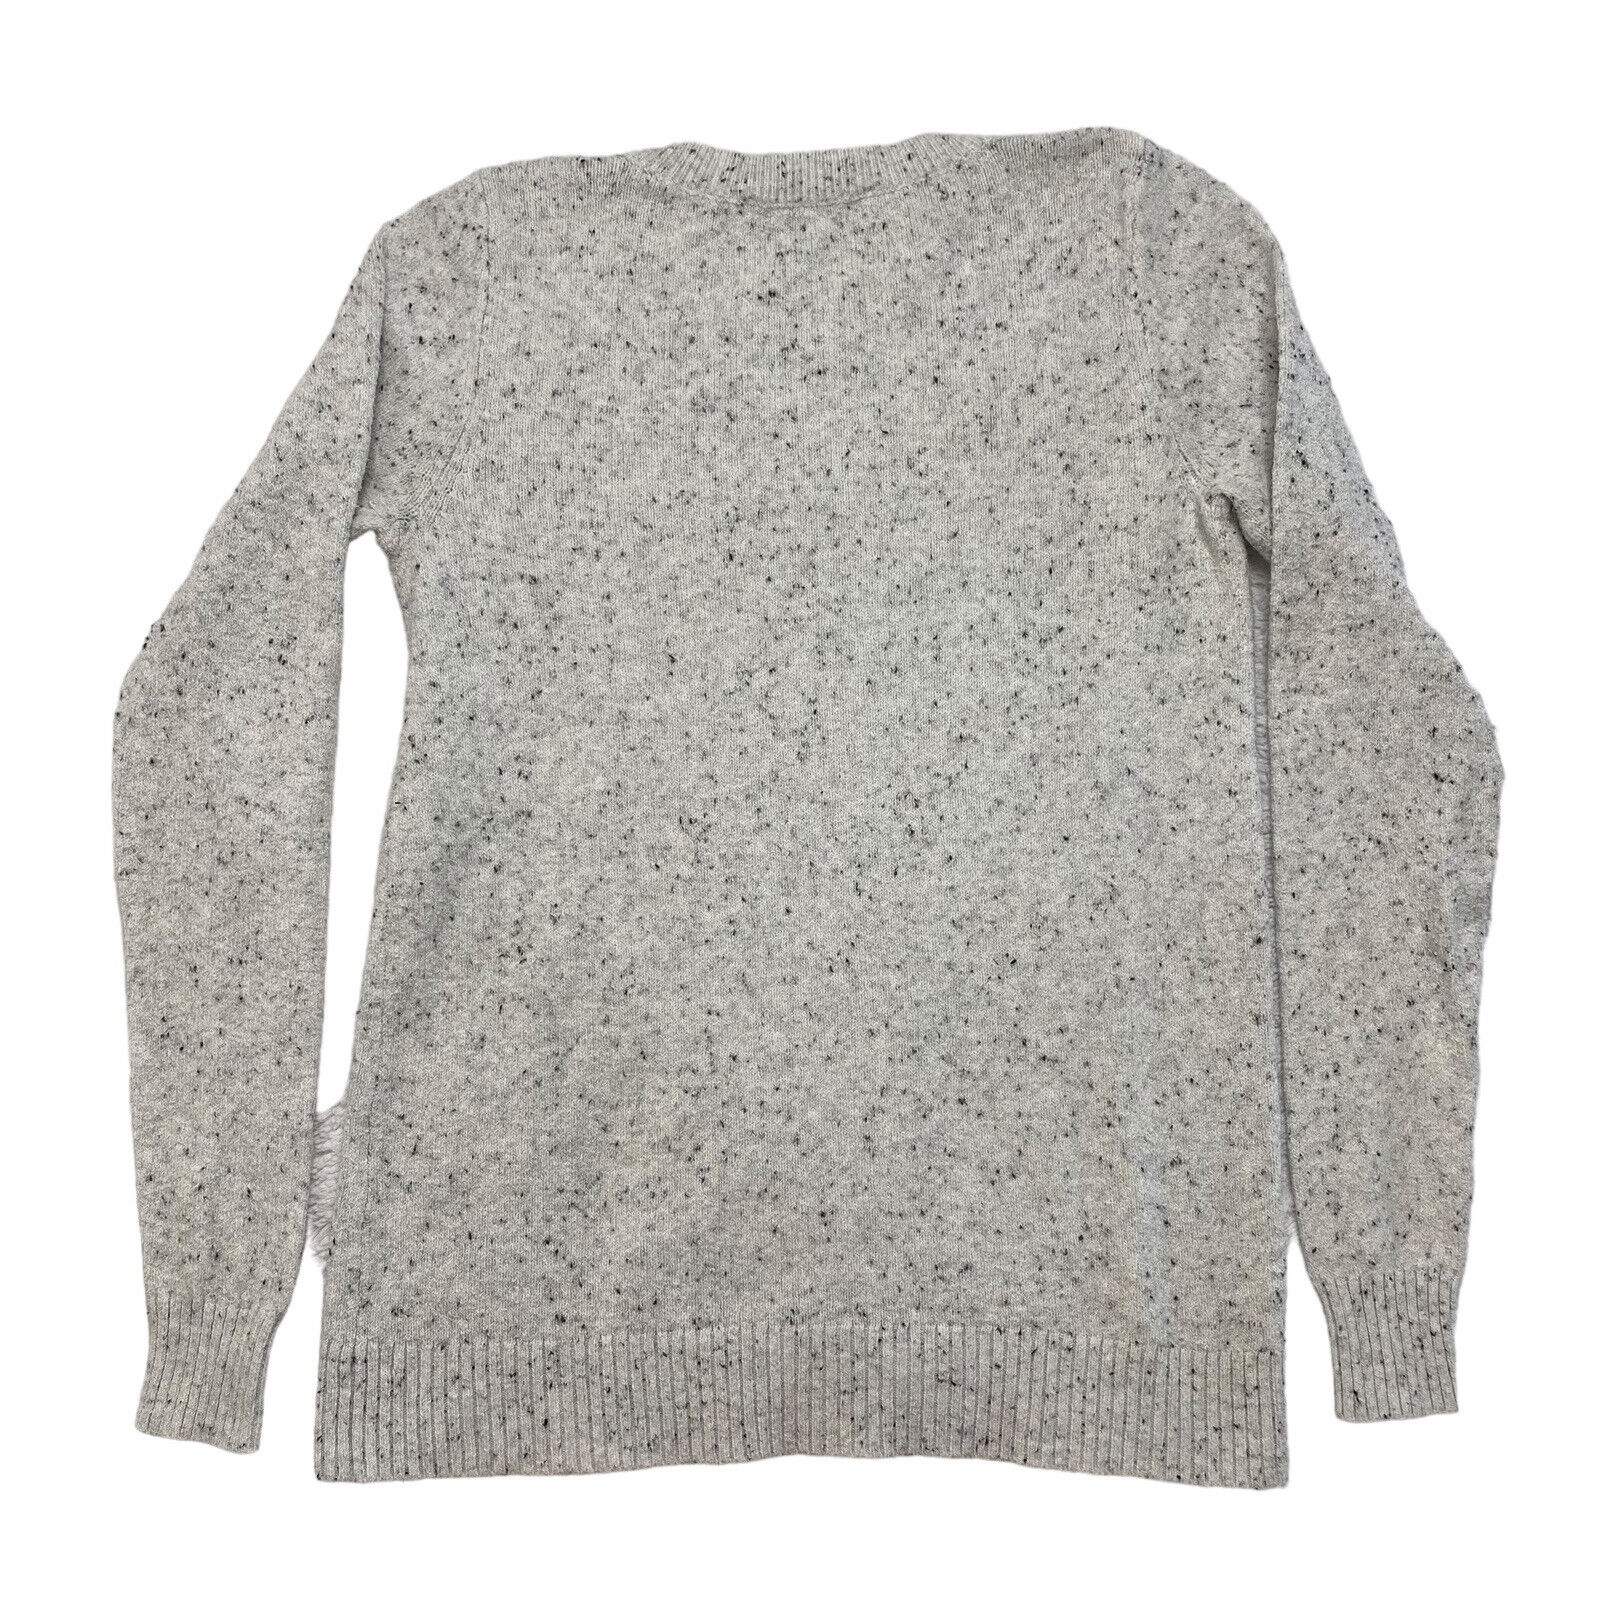 LOFT Playful Penguin Gray Speckled Crew Neck Pullover Sweater Size XS/S ...